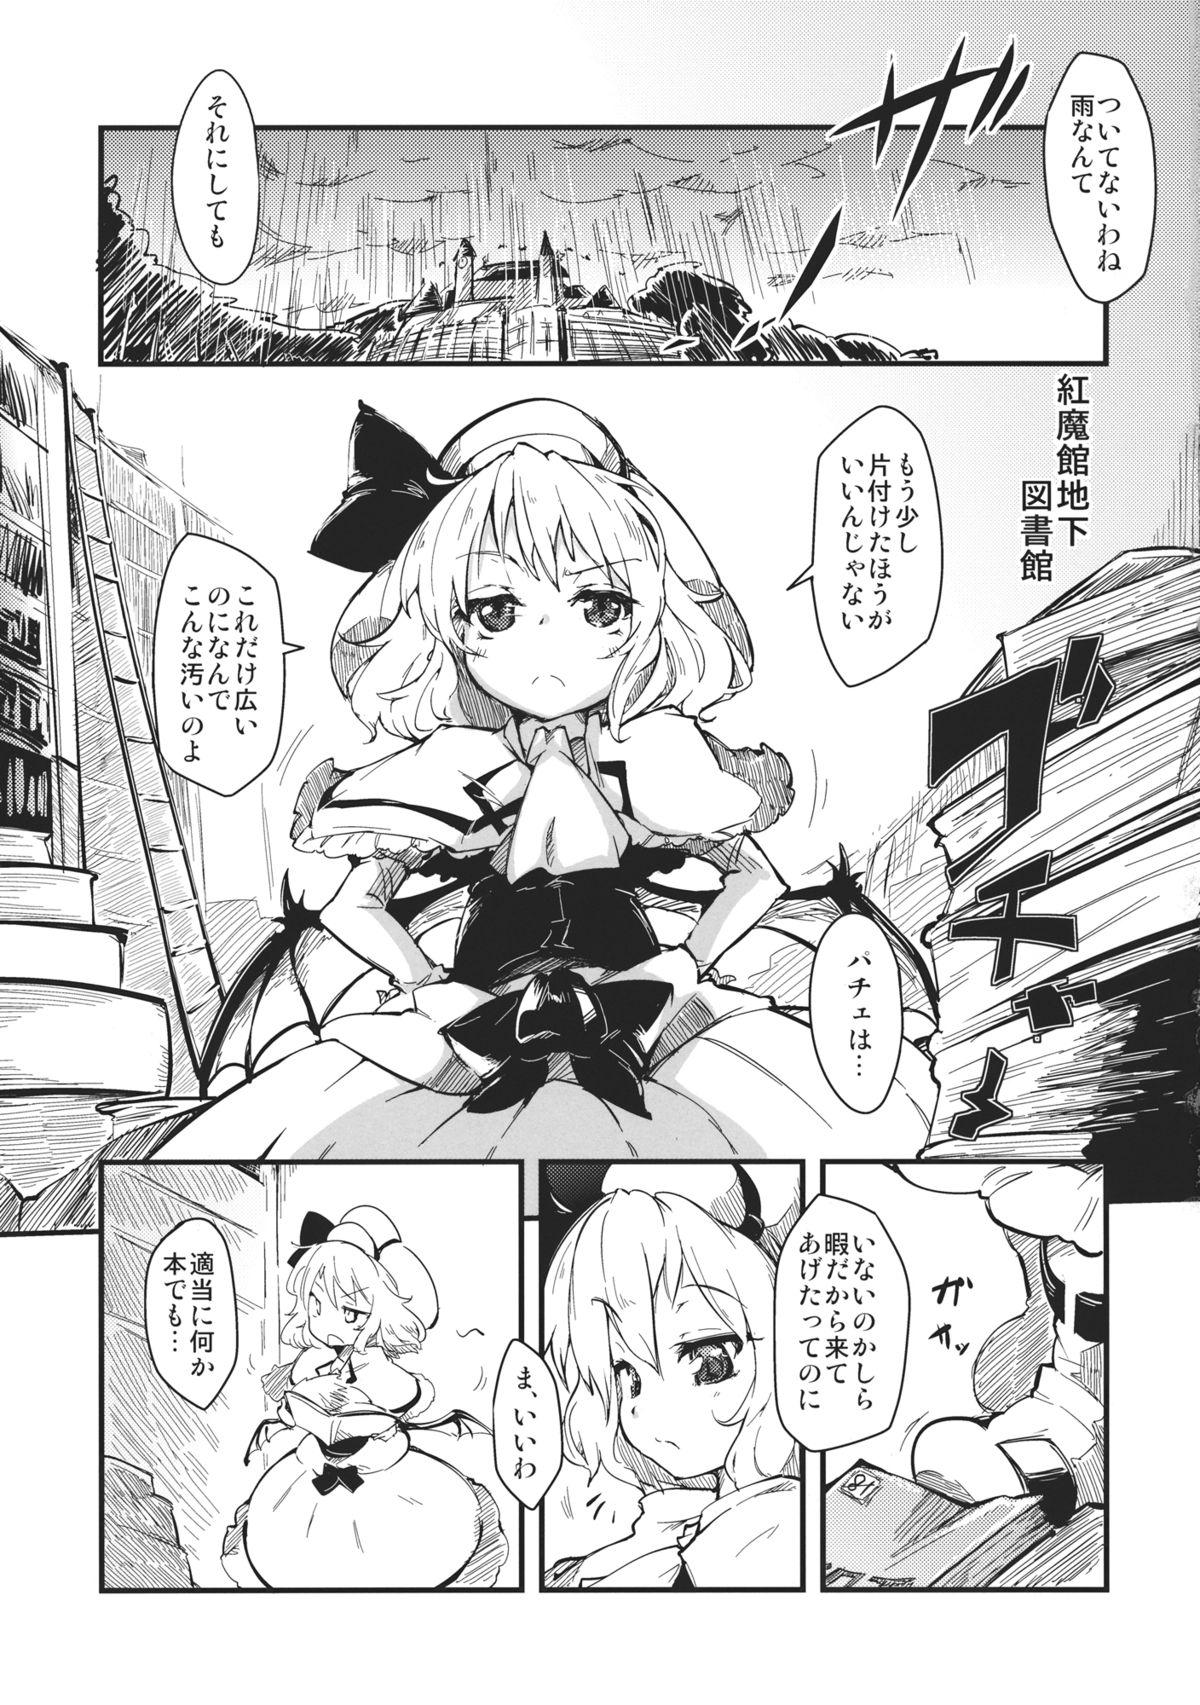 Closeups LolitaEmpress - Touhou project Belly - Page 3